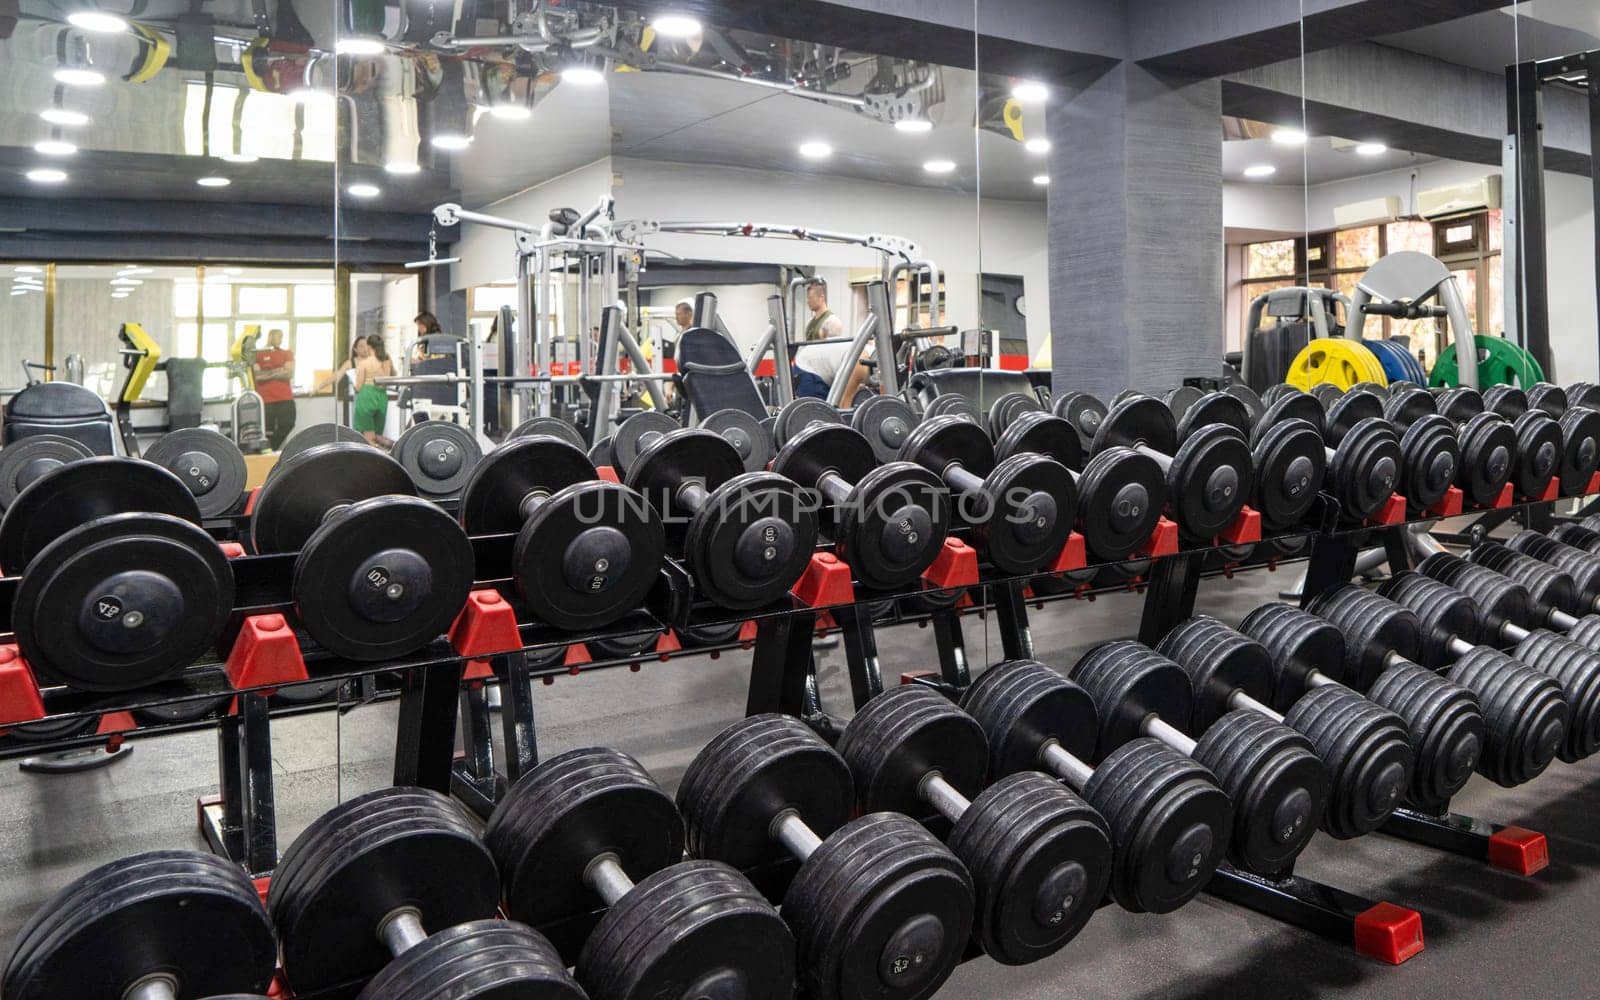 The dumbbells in the sports complex